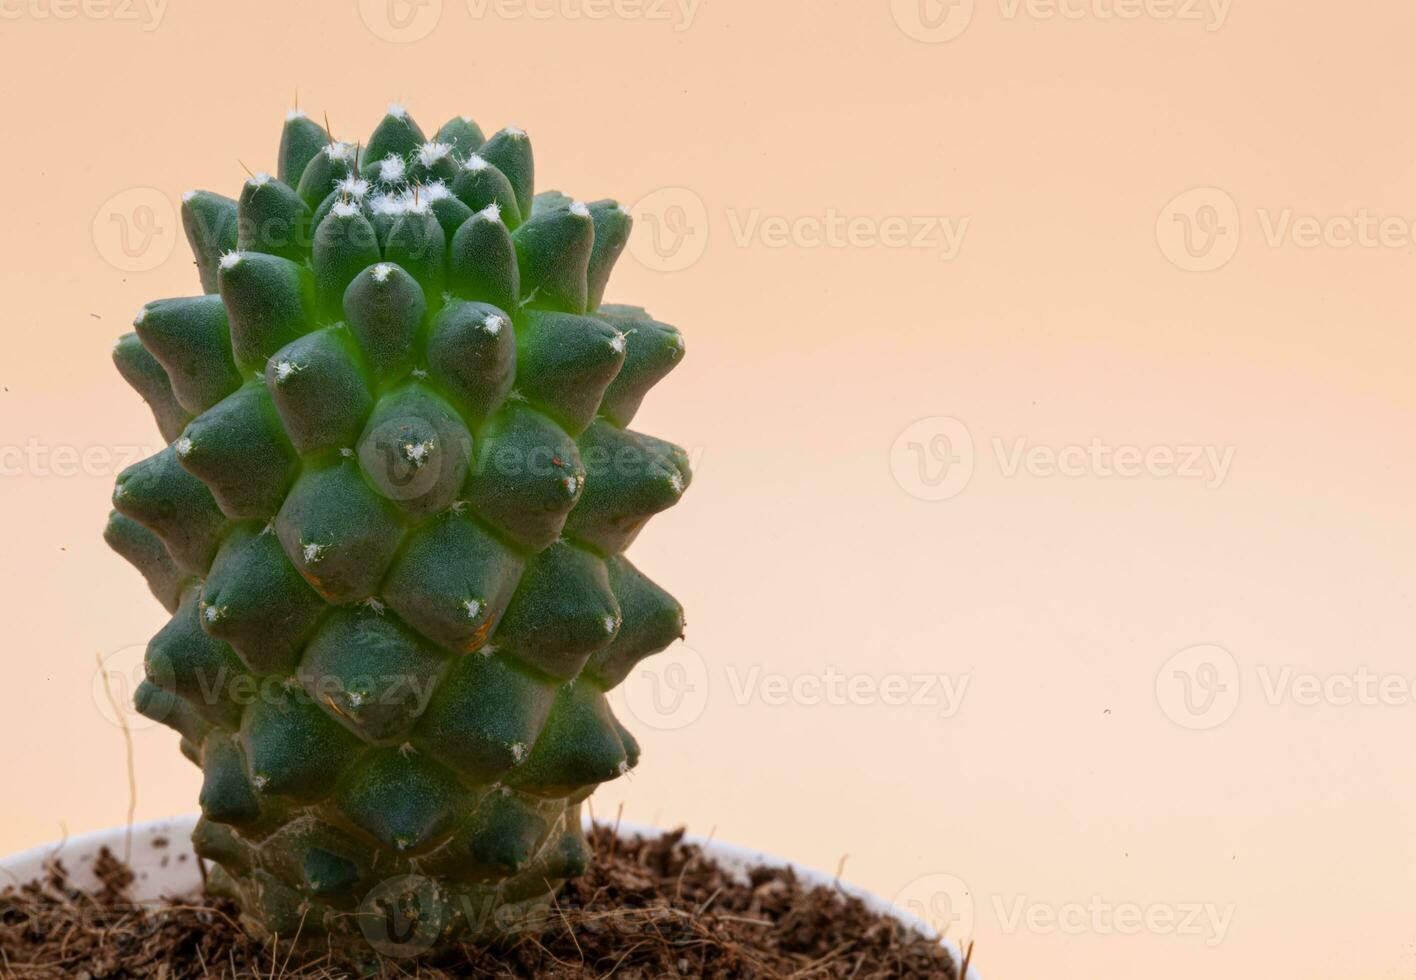 Green cactus in a pot of earth on a peach background. White flecks on the cactus. Macro photography. Photo in high quality.